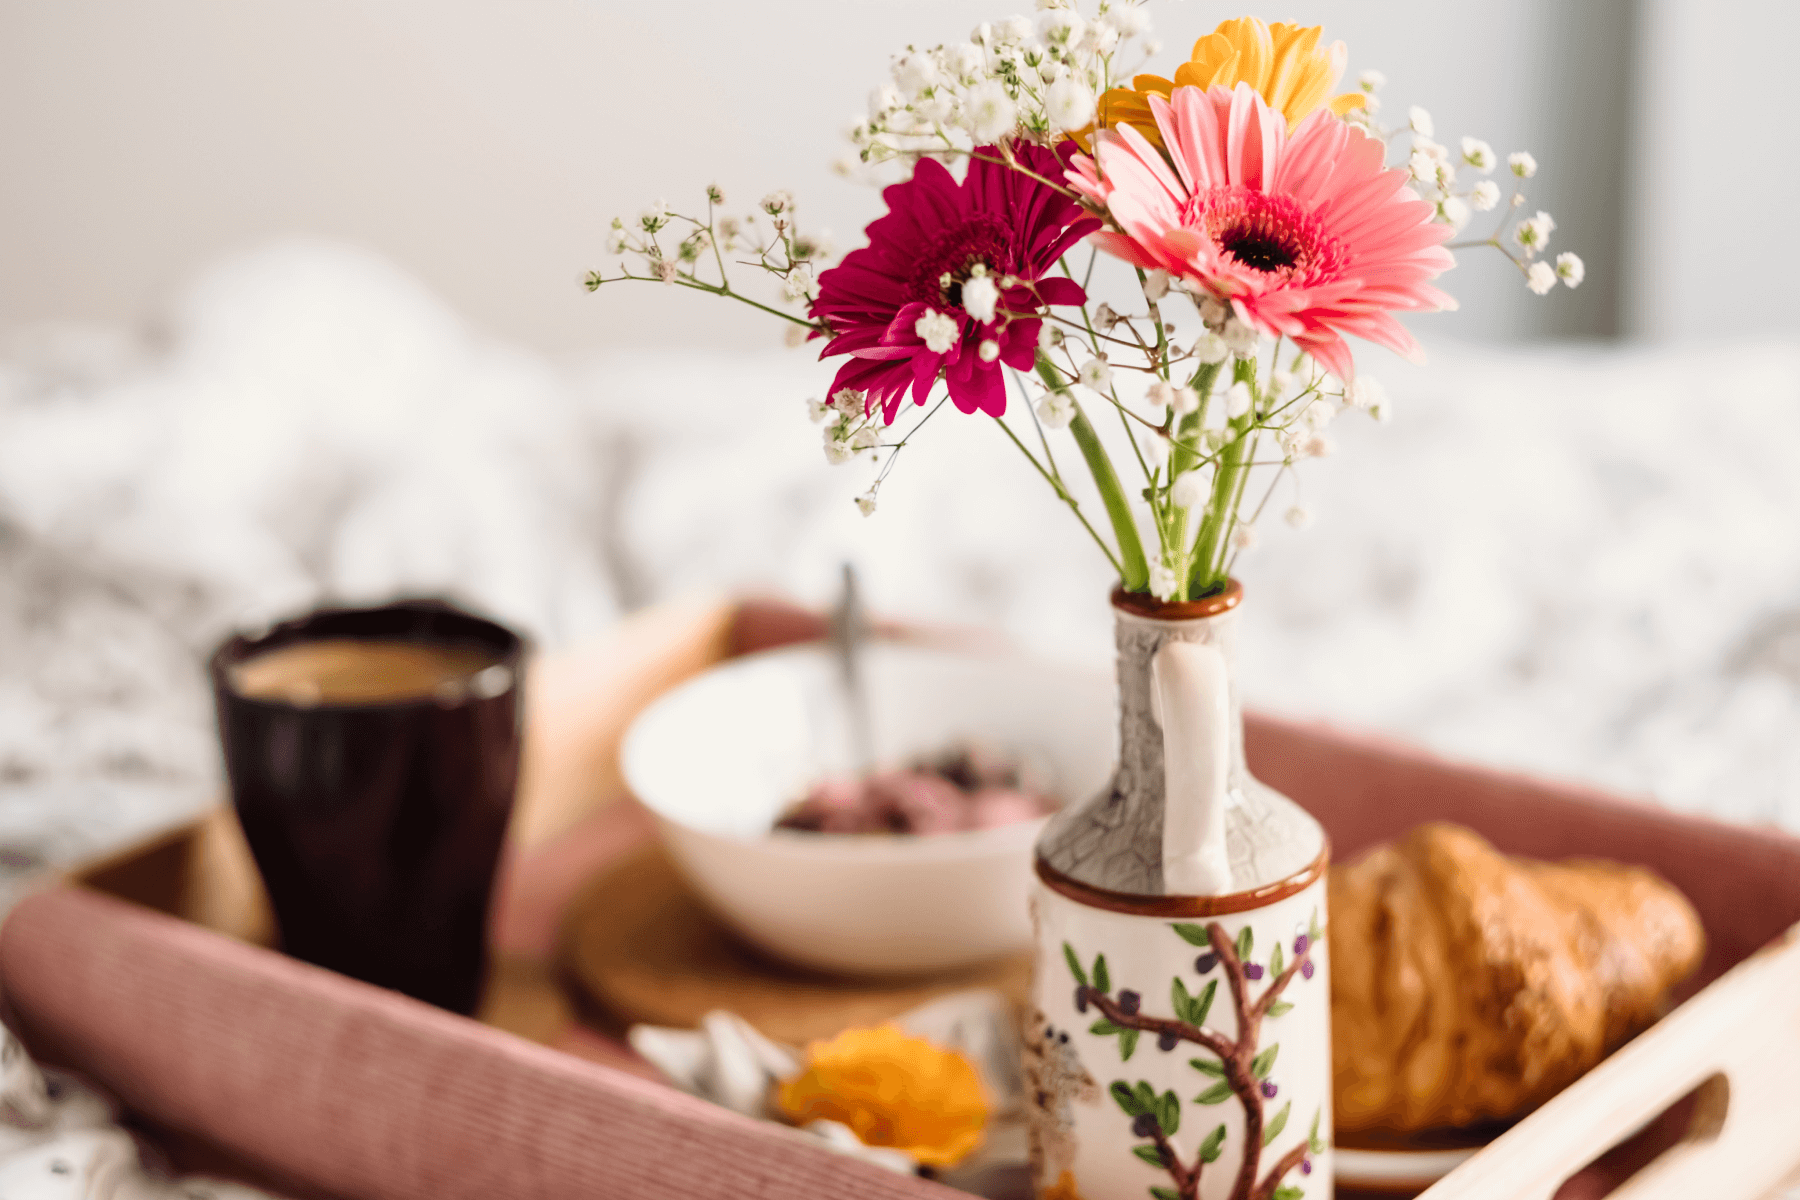 A soft focus photo of breakfast in bed with flowers.